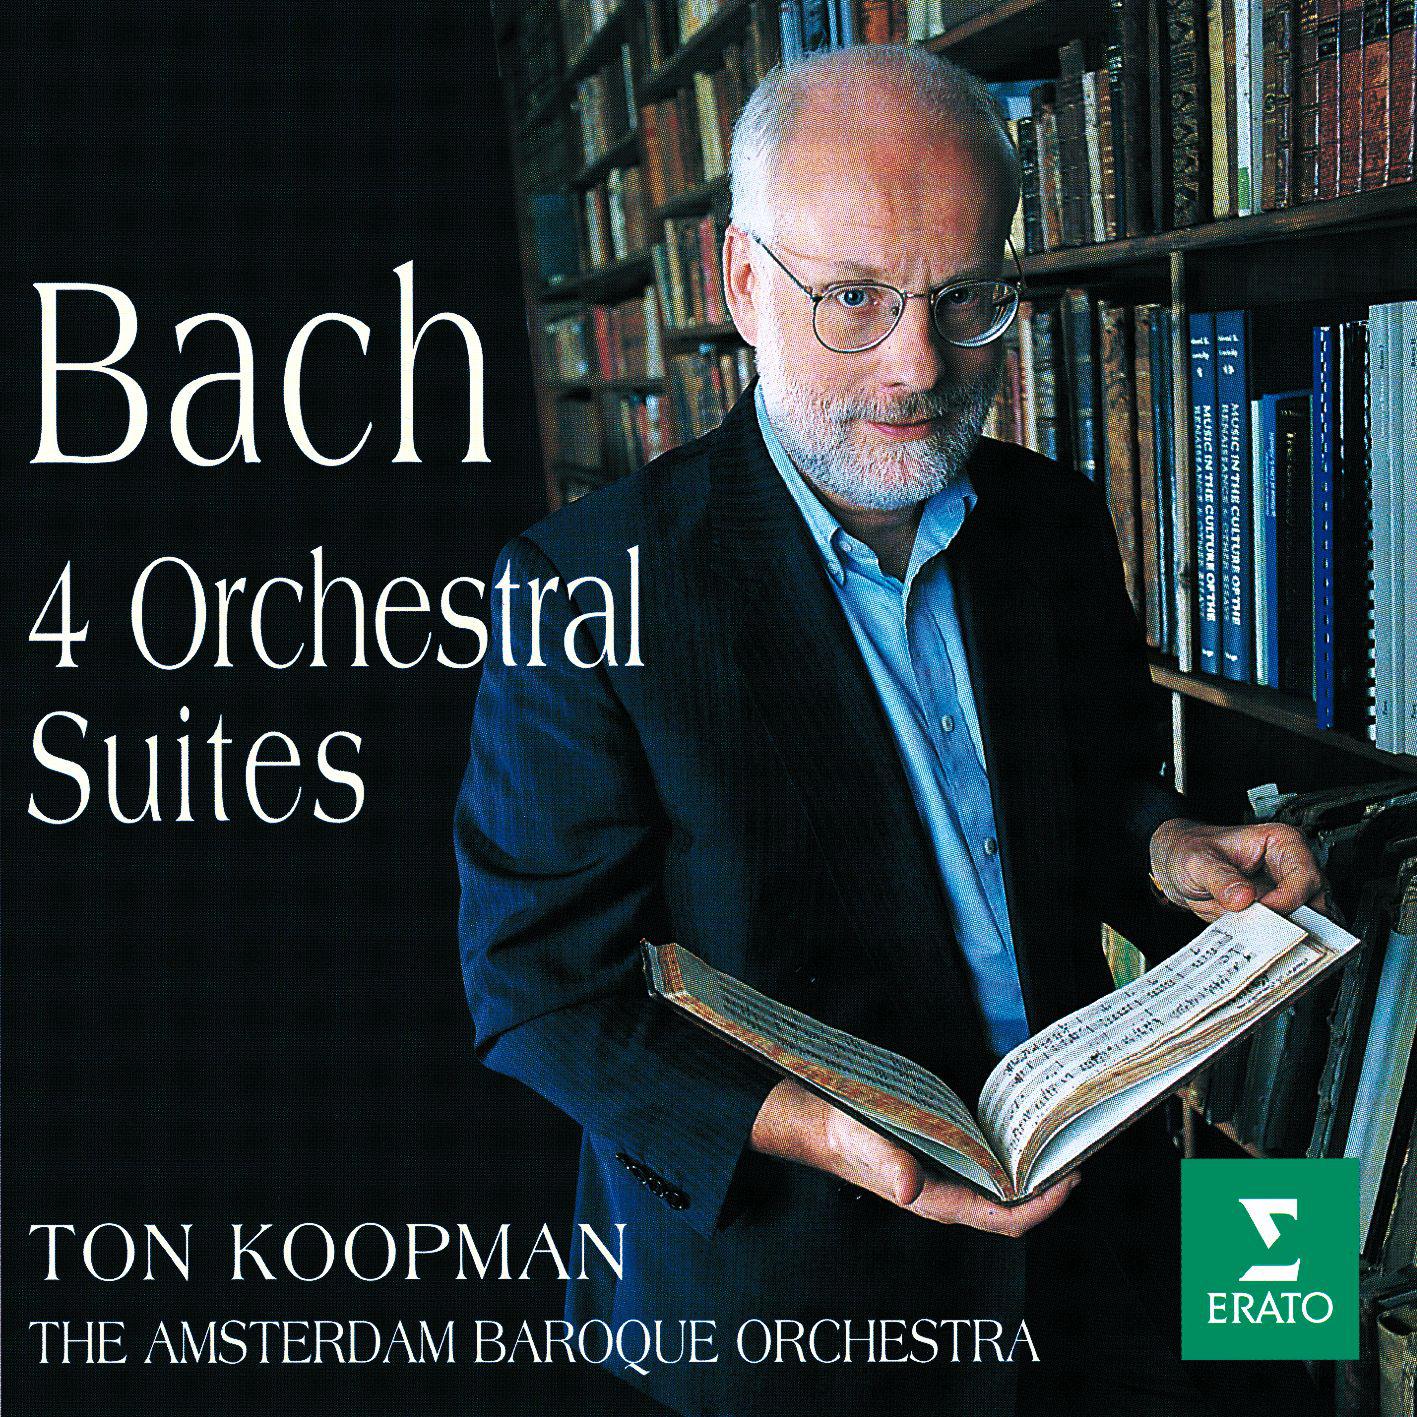 Orchestral Suite No. 3 in D major BWV1068 : IV Boure e